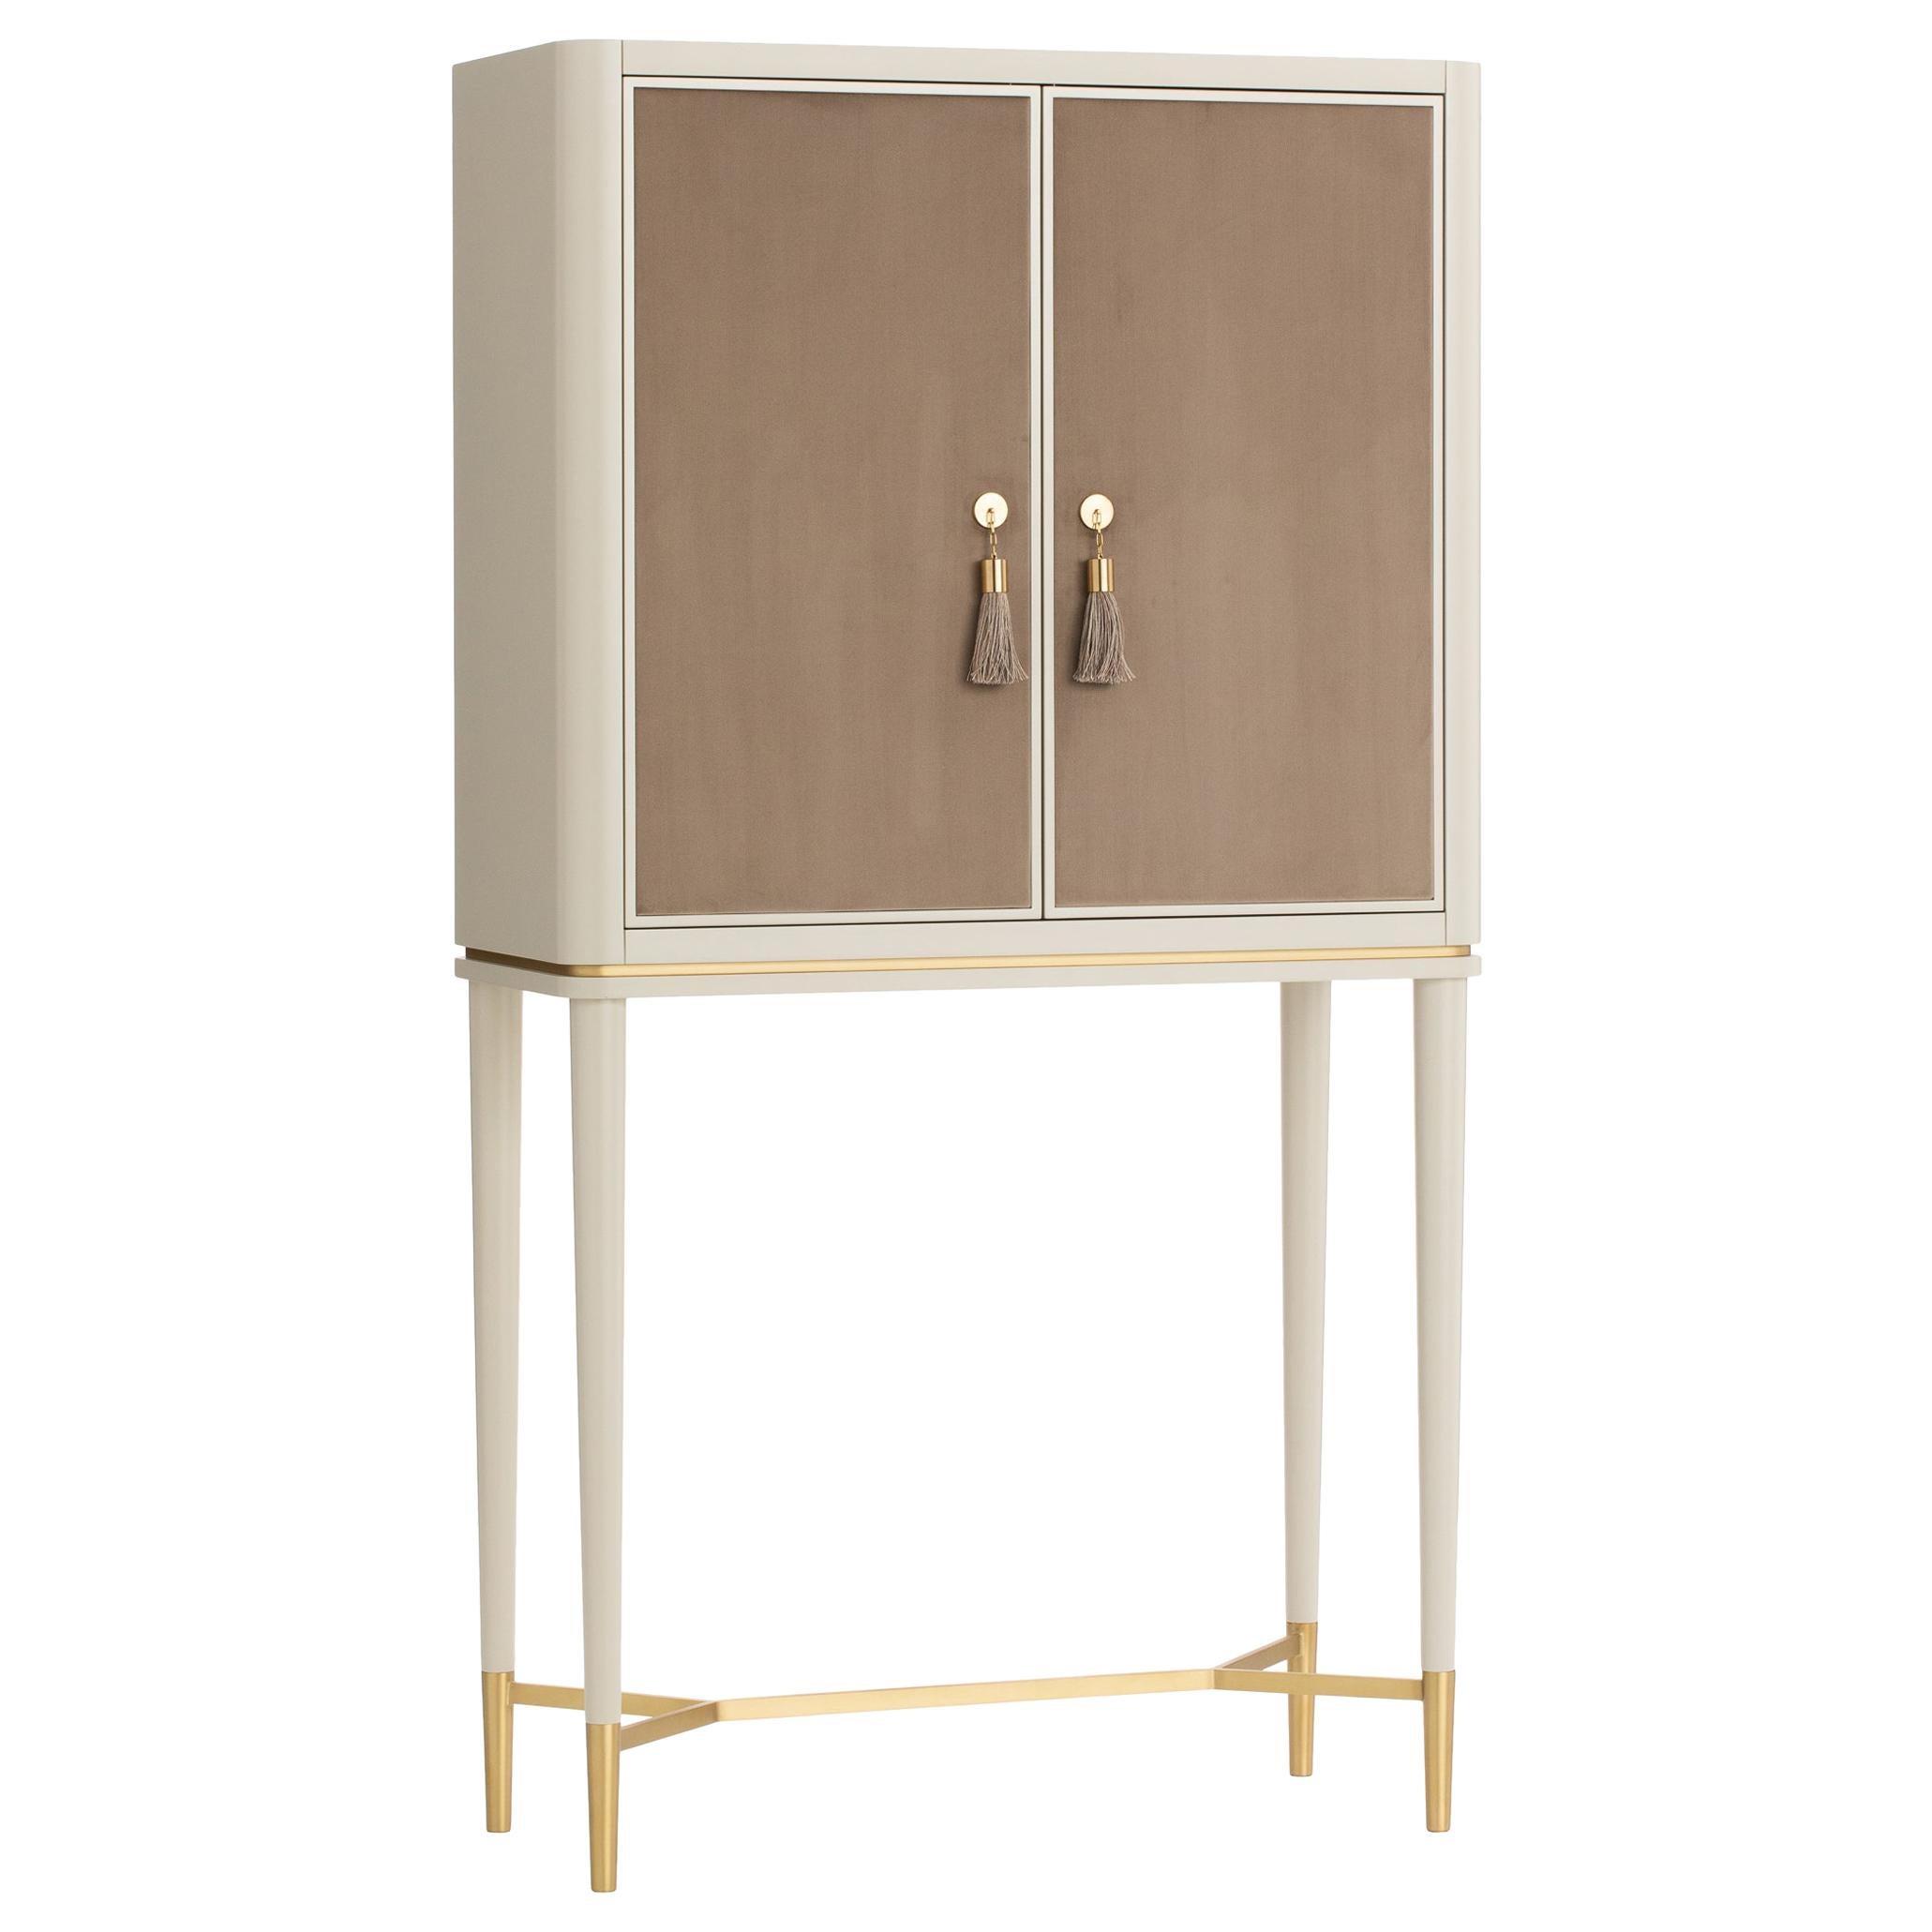 Guga Bar Cabinet with Lined Doors and Antique Brass Feet and Handles